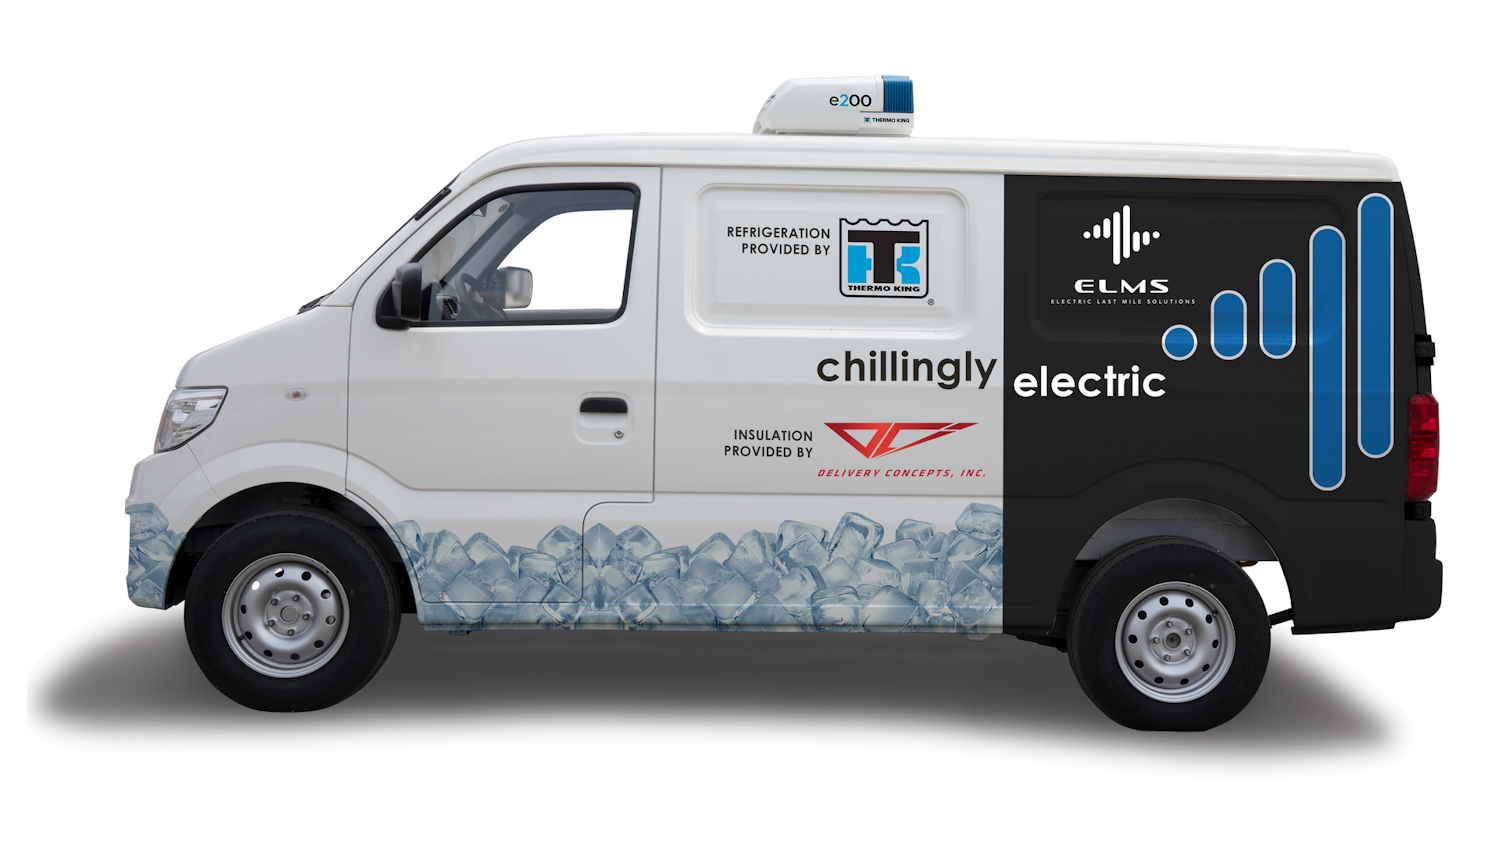 Thermo King and and Electric Last Mile Solutions partnered on a Class 1 fully electric refrigerated van.